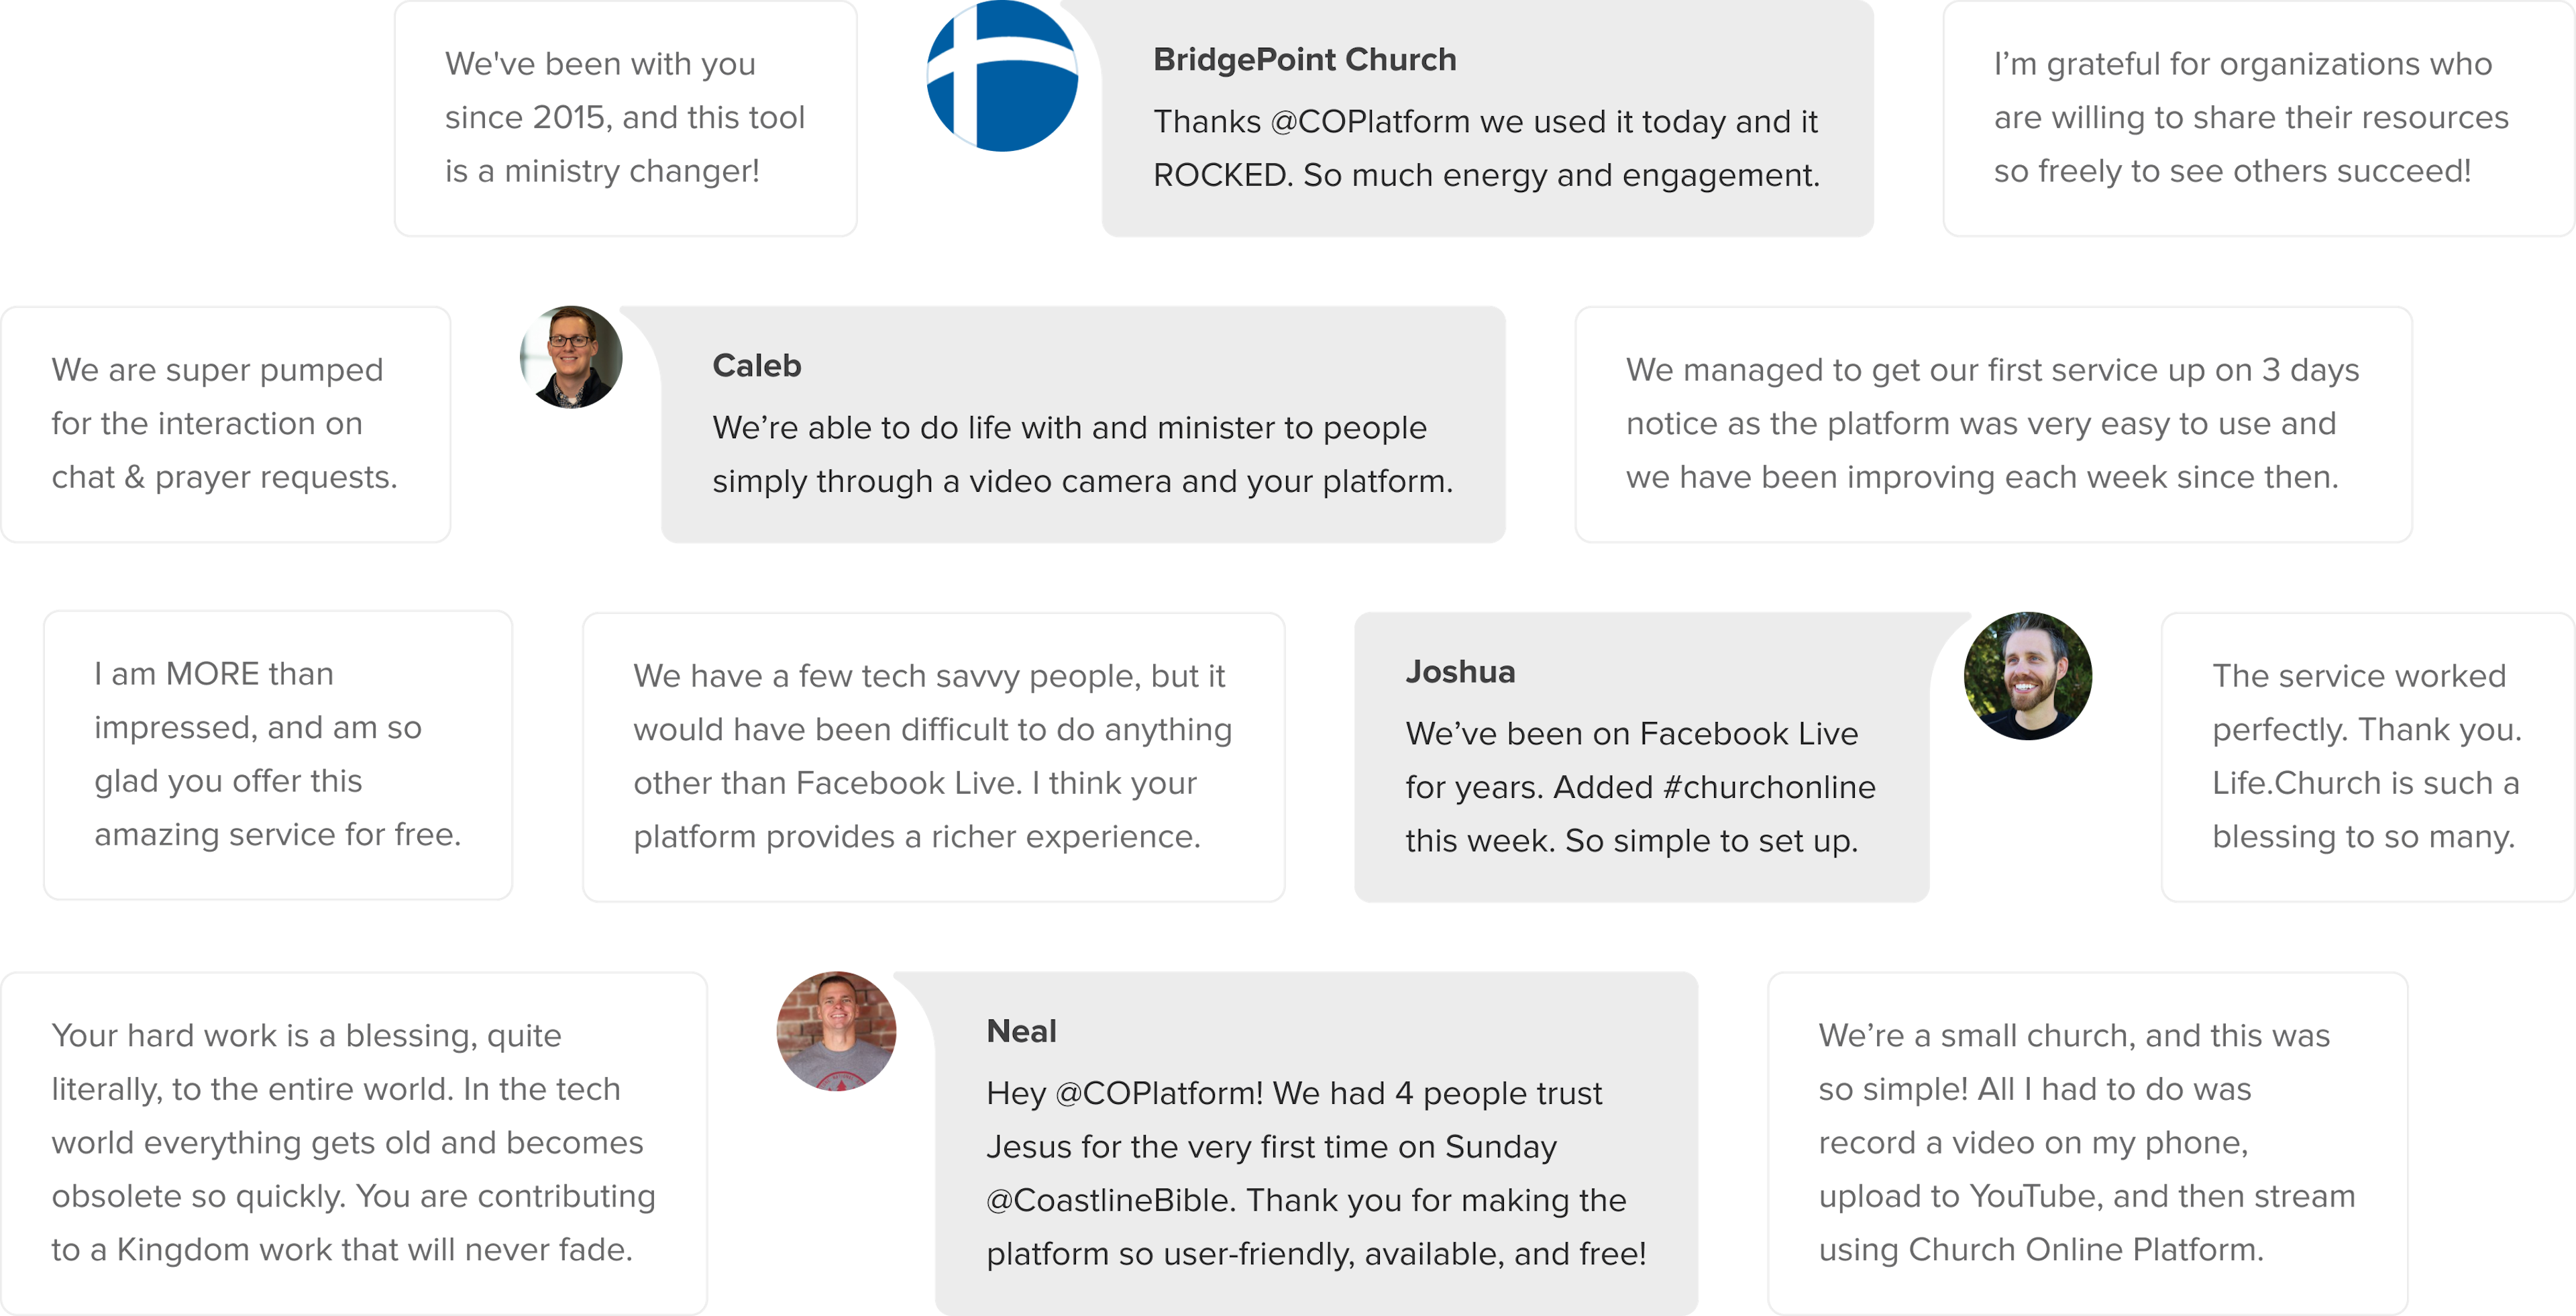 Wall of quotes about the Church Online Platform